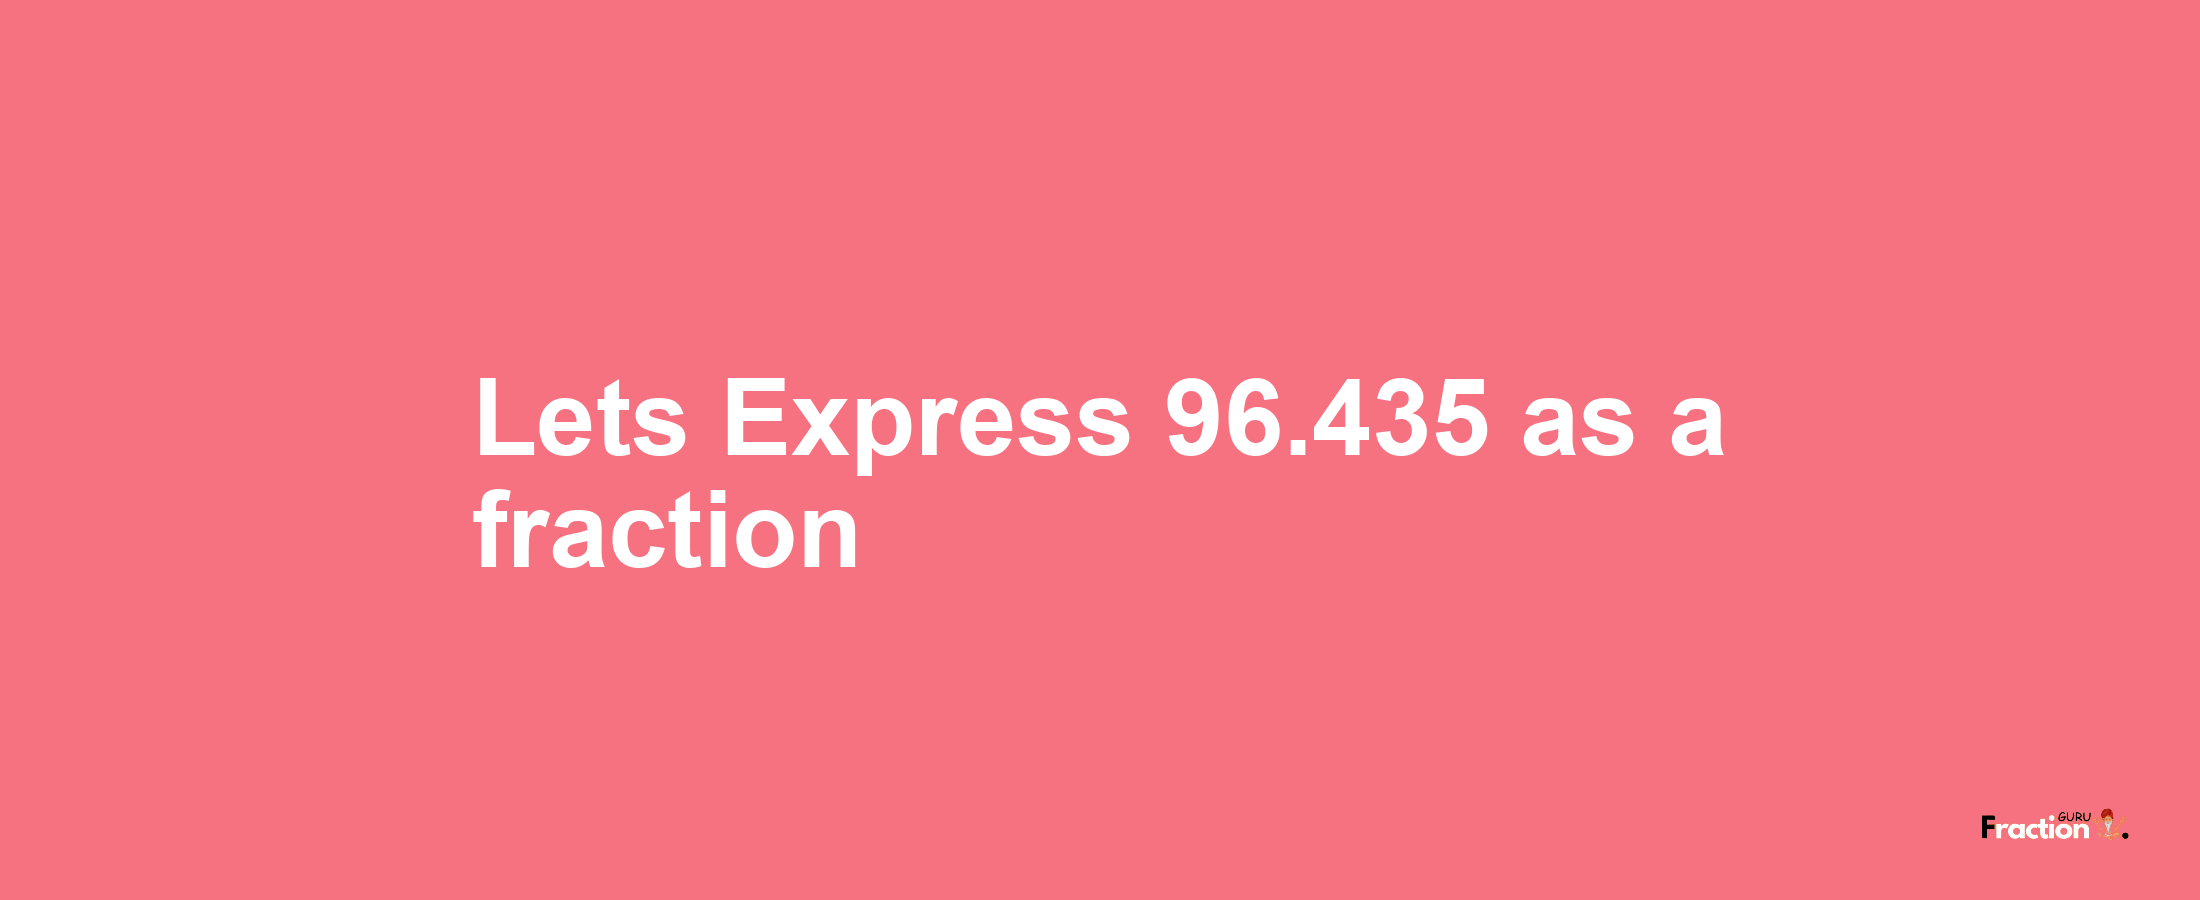 Lets Express 96.435 as afraction